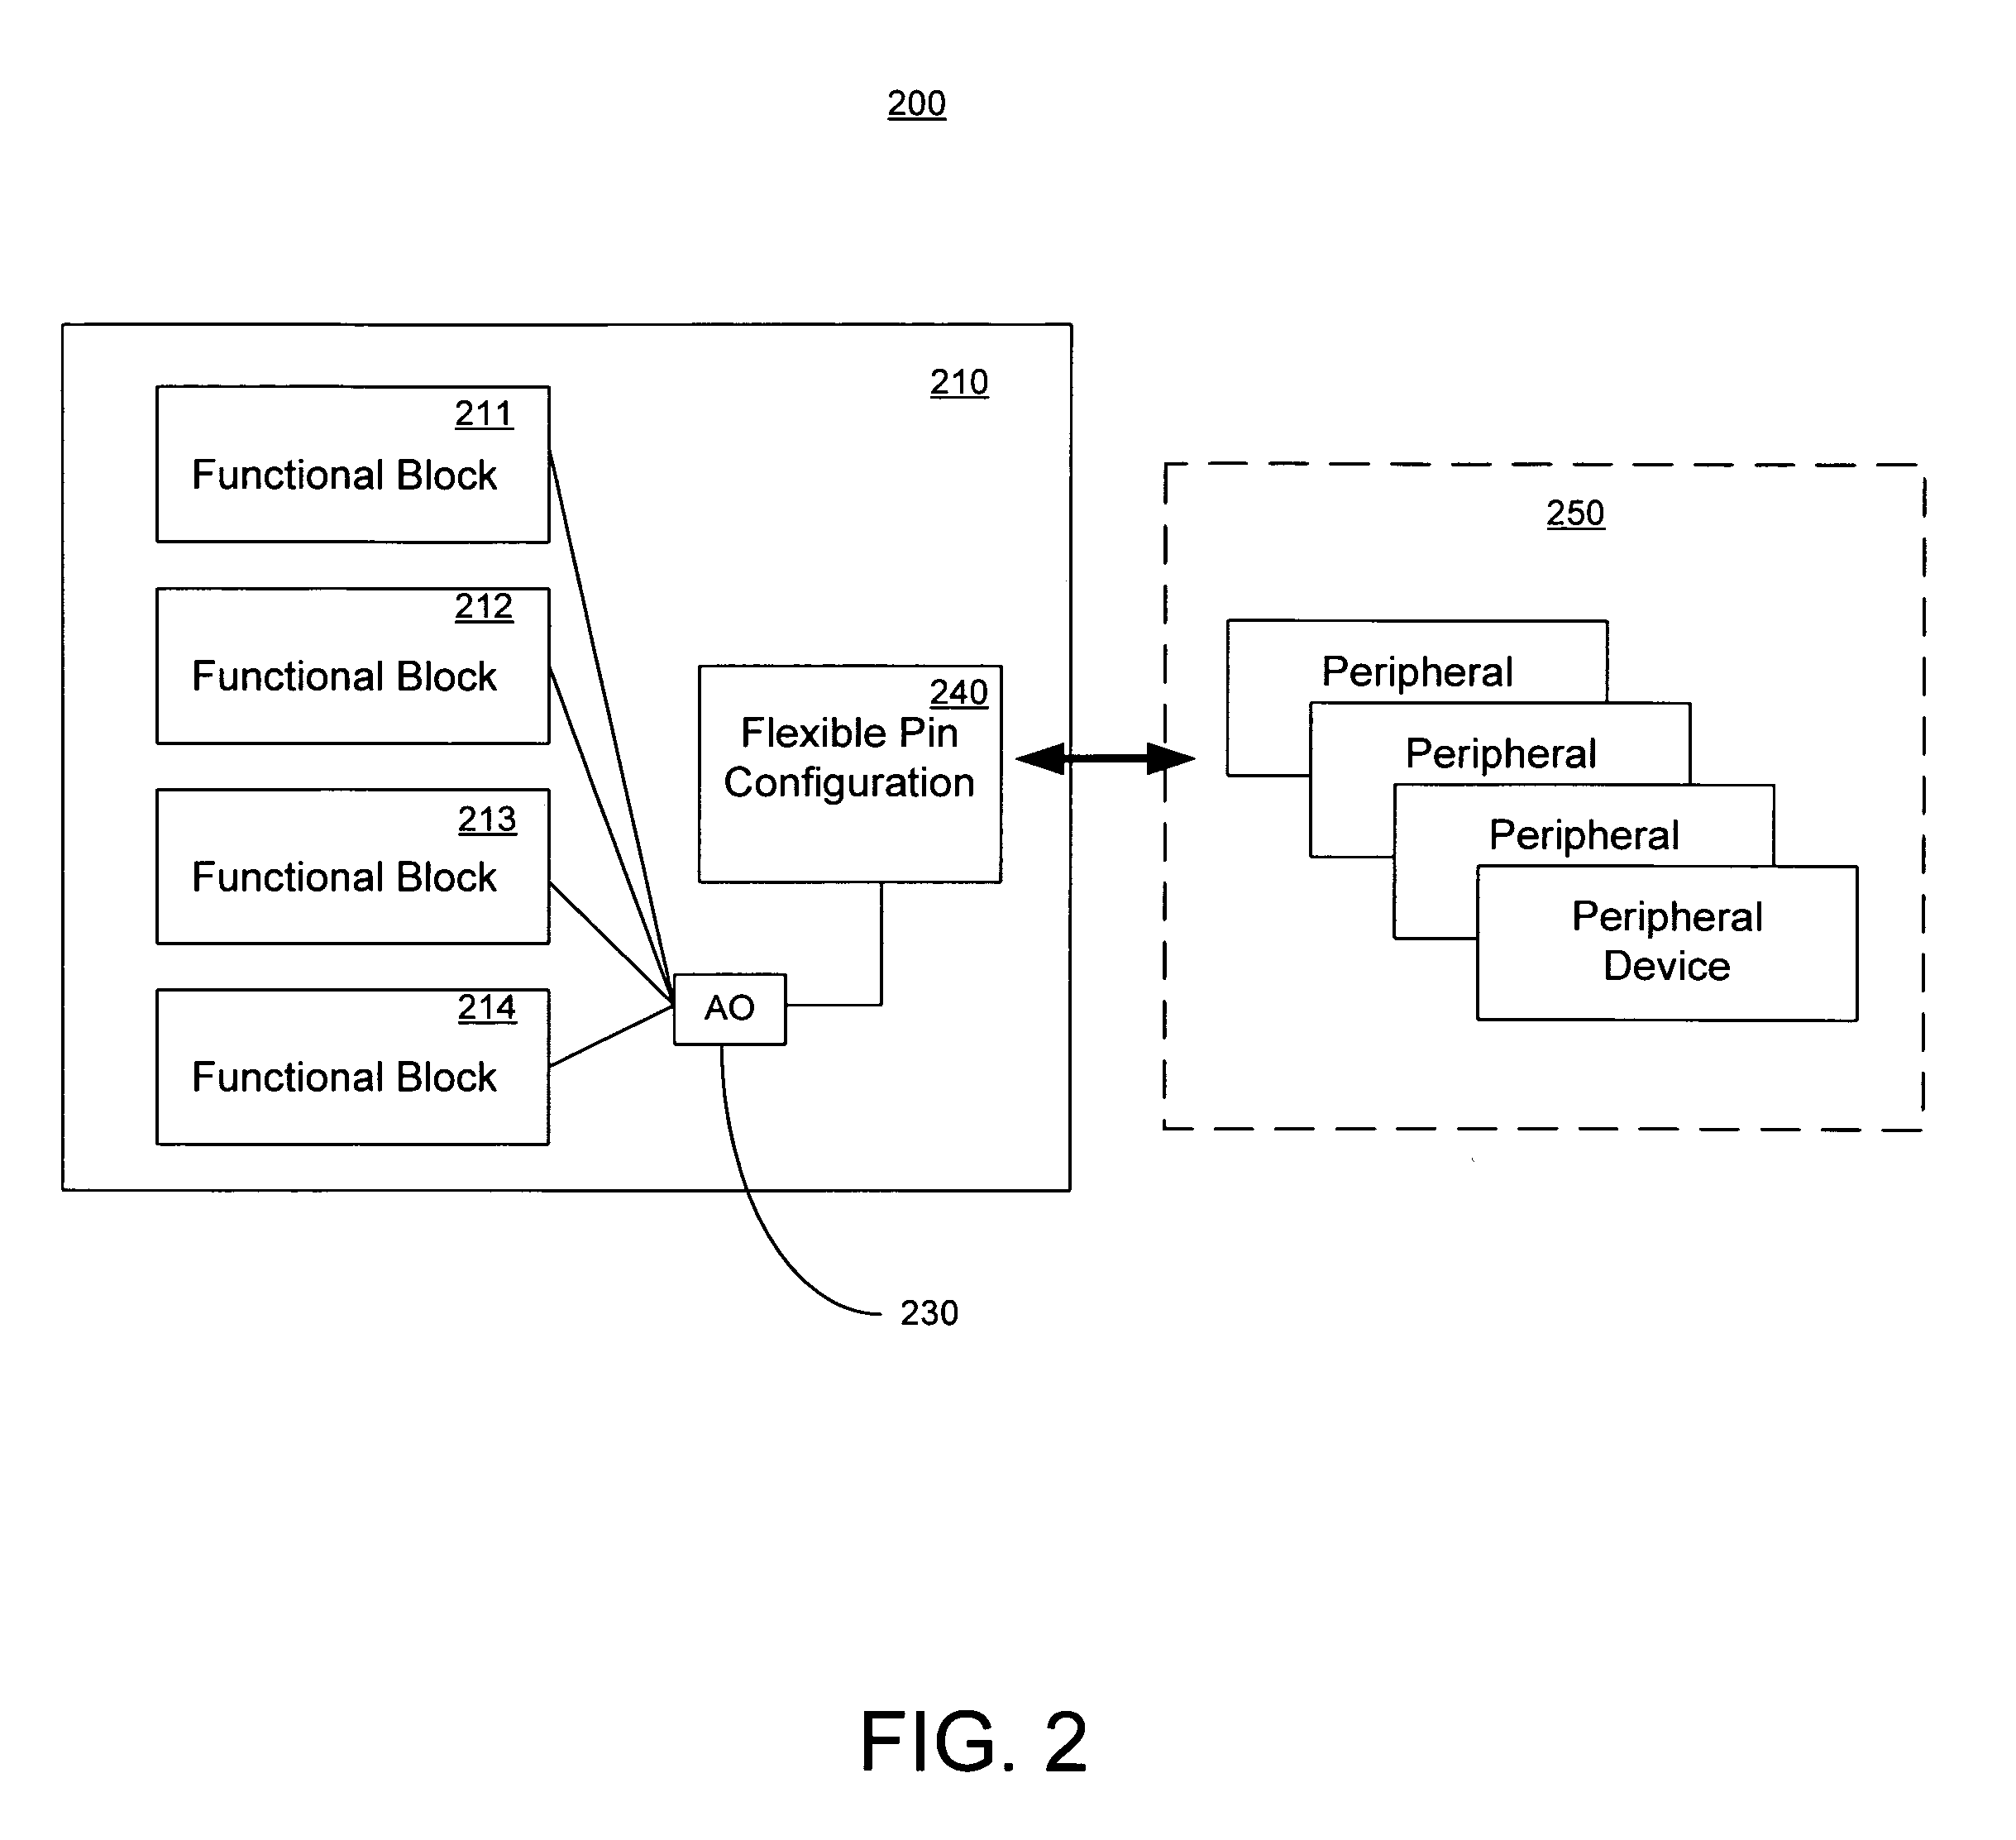 Integrated circuit device core power down independent of peripheral device operation